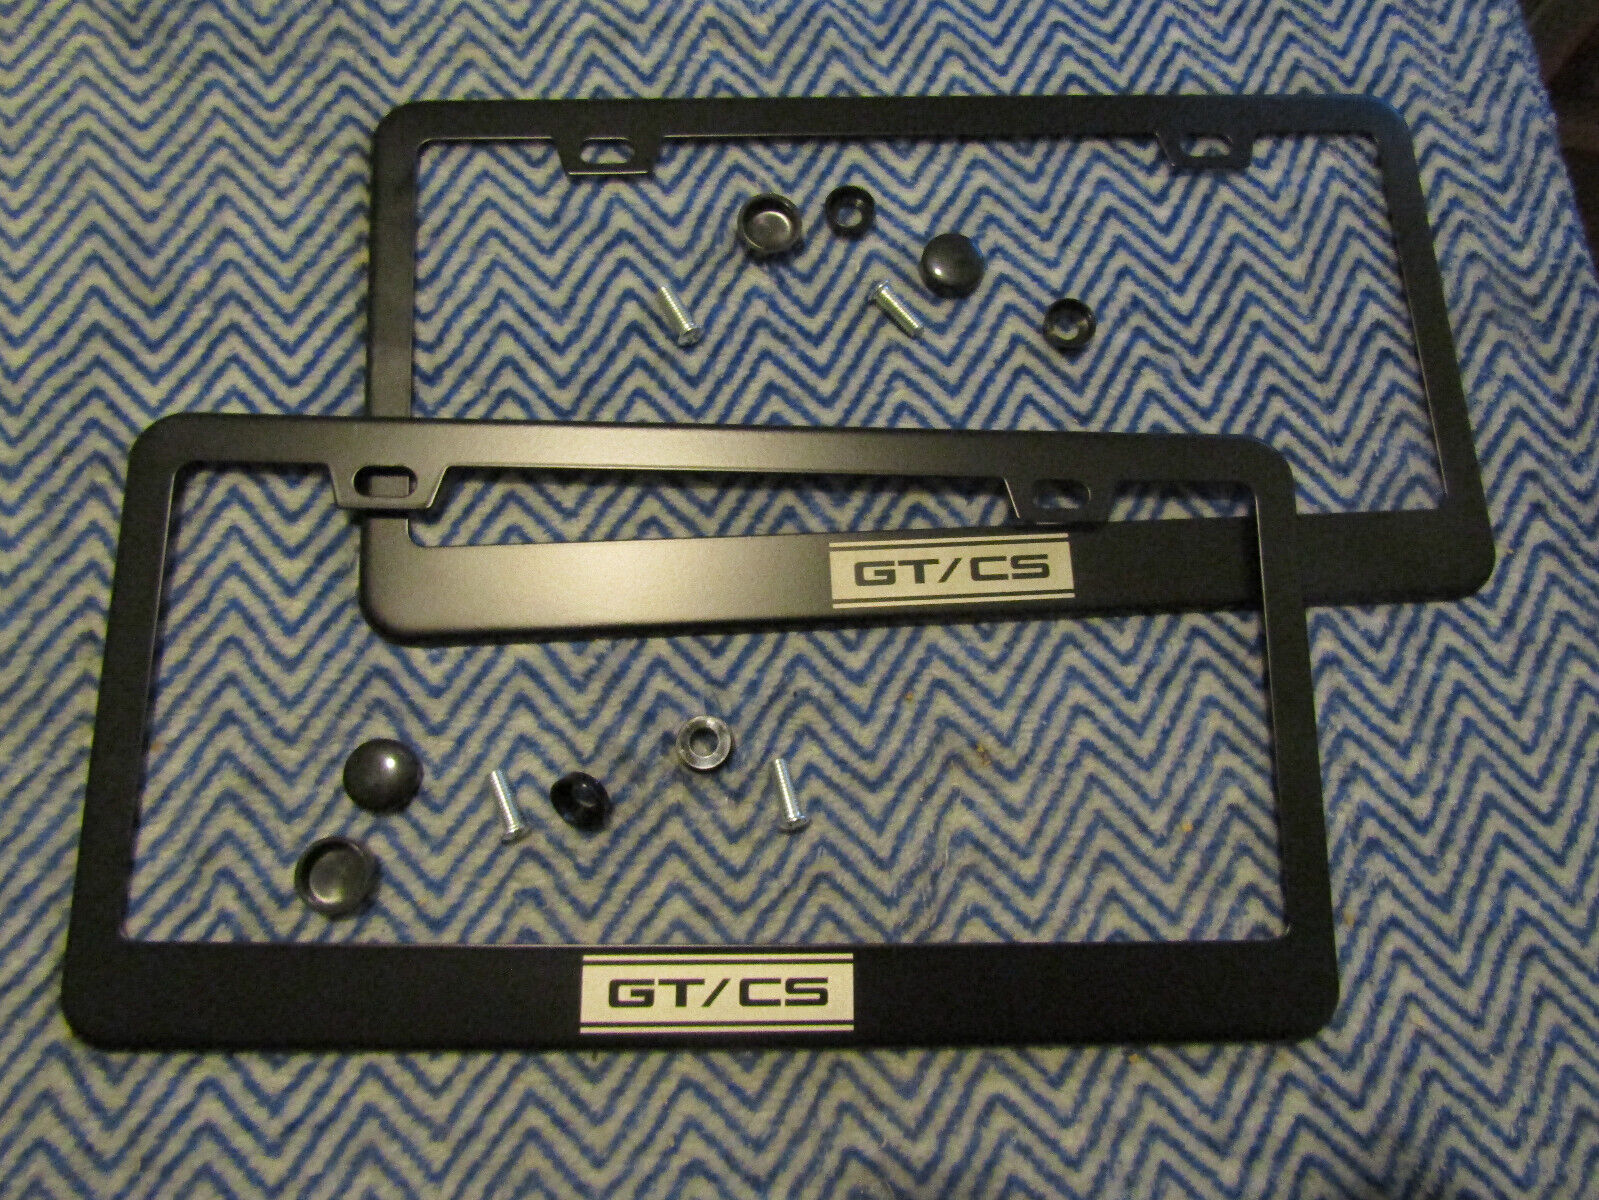 2007 - 2017 FORD MUSTANG GT/CS CALIFORNIA SPECIAL METAL LICENSE PLATE FRAMES 2PC